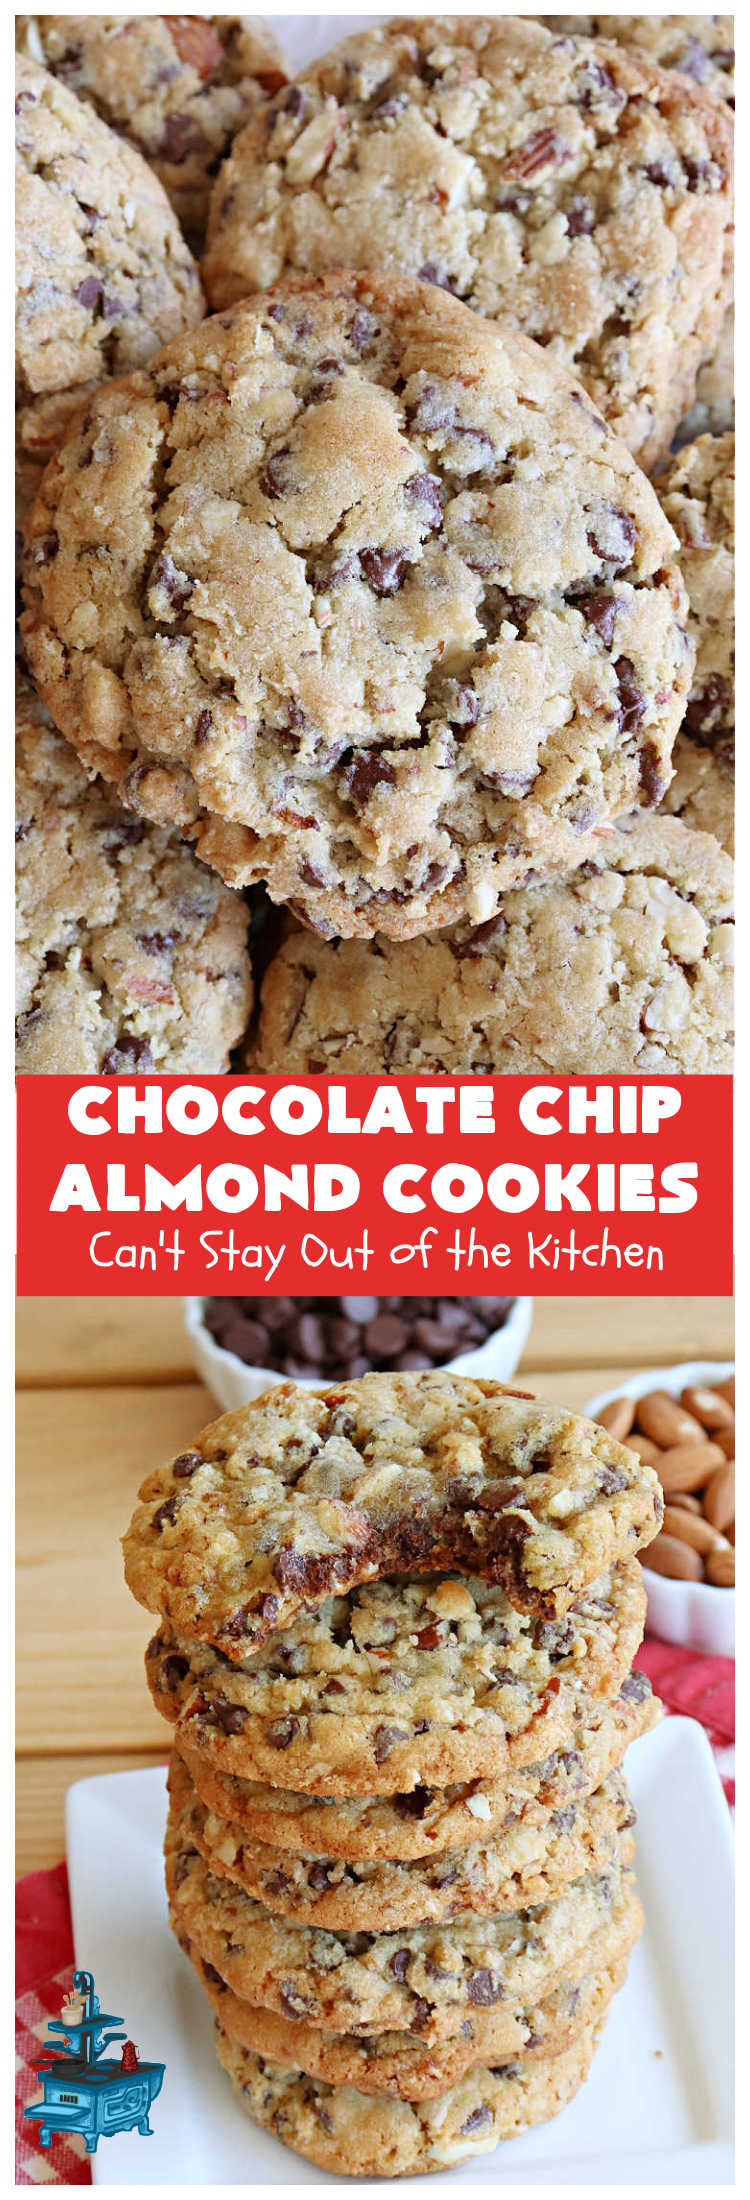 Chocolate Chip Almond Cookies | Can't Stay Out of the Kitchen | these fantastic #cookies are divine! They include 2 bags of miniature #ChocolateChips & chopped #almonds. They're crunchy, chocolaty and mammoth-sized. Wonderful for #tailgating or office parties, potlucks, soccer or hockey practice for your kids or backyard BBQs. Every bite is just perfect! #dessert #ChocolateDessert #chocolate #AlmondDessert #ChristmasCookieExchange #ChocolateChipAlmondCookies